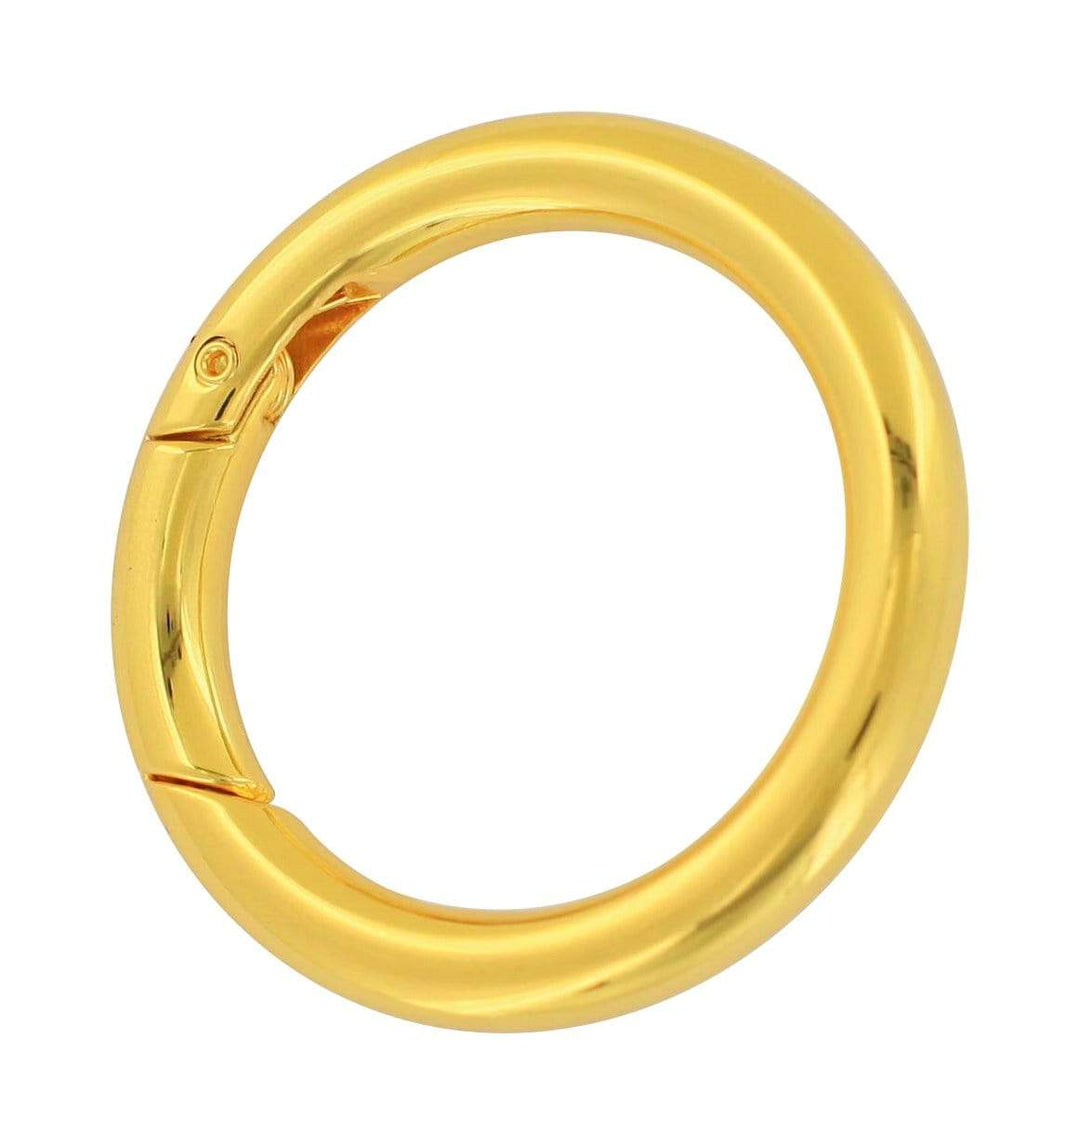 Ohio Travel Bag Rings & Slides 1 1/2" Gold, Spring Gate Round Ring, Zinc Alloy, #P-2526-GOLD P-2526-GOLD